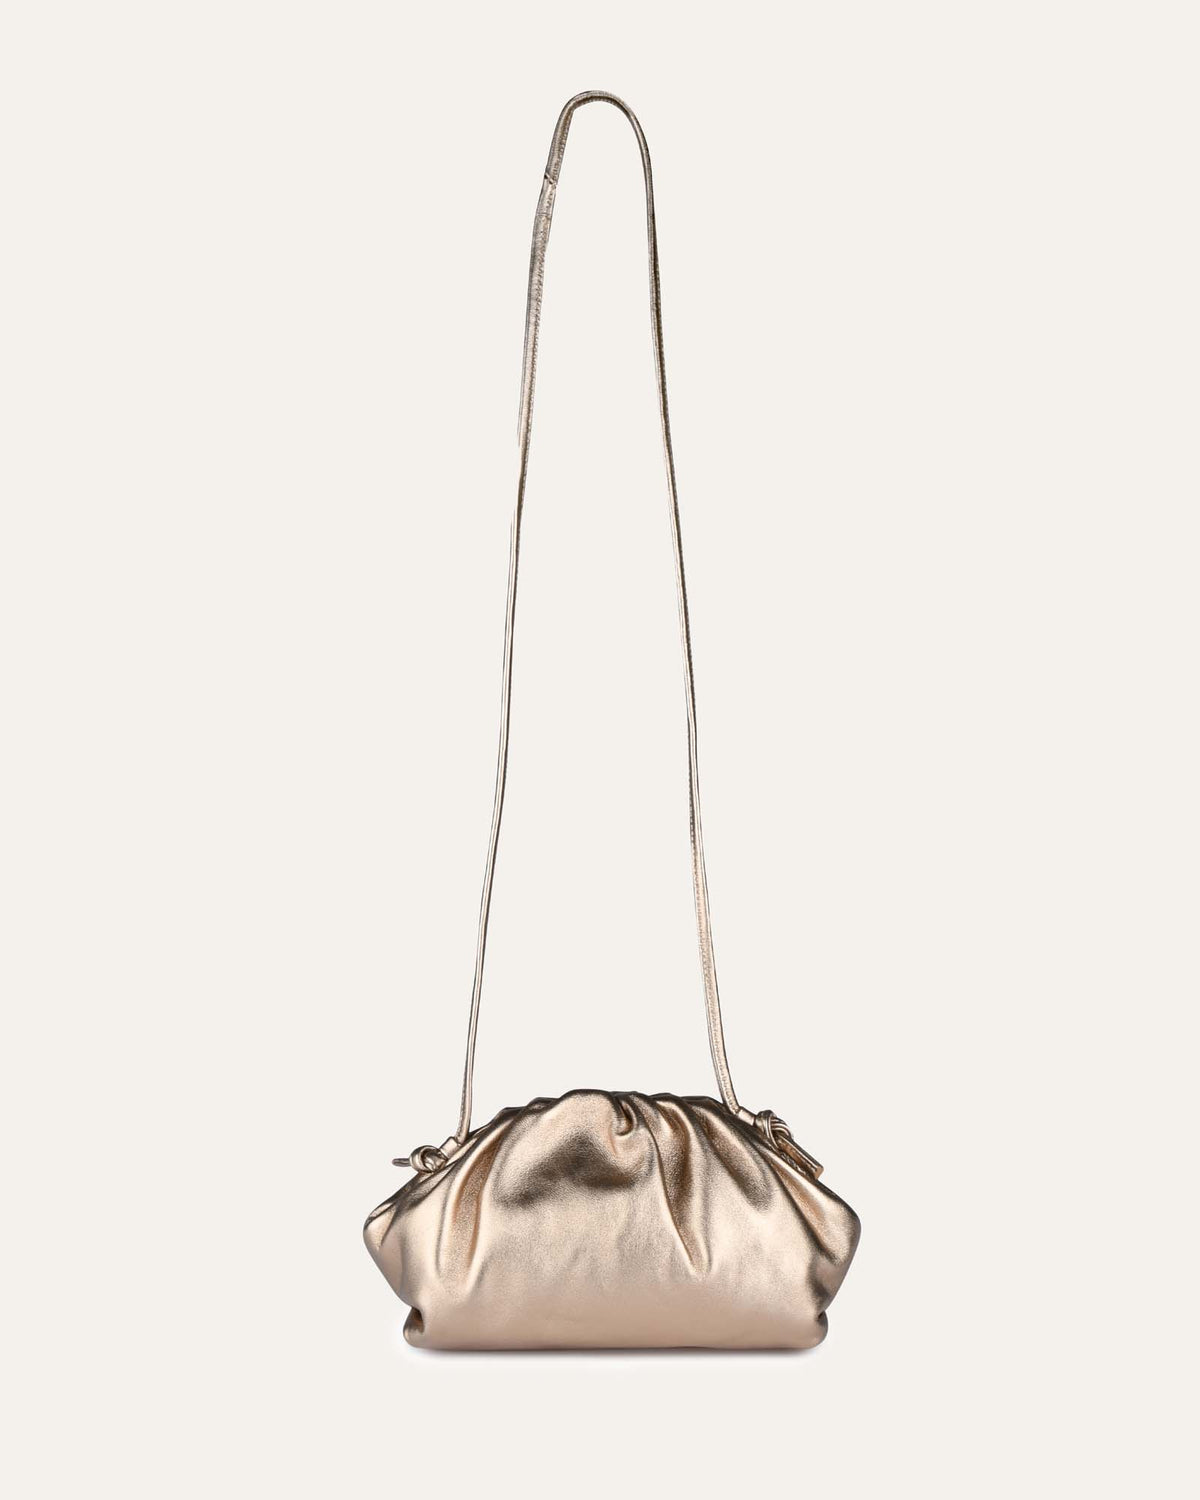 BAMBIE CROSS BODY BAG GOLD LEATHER